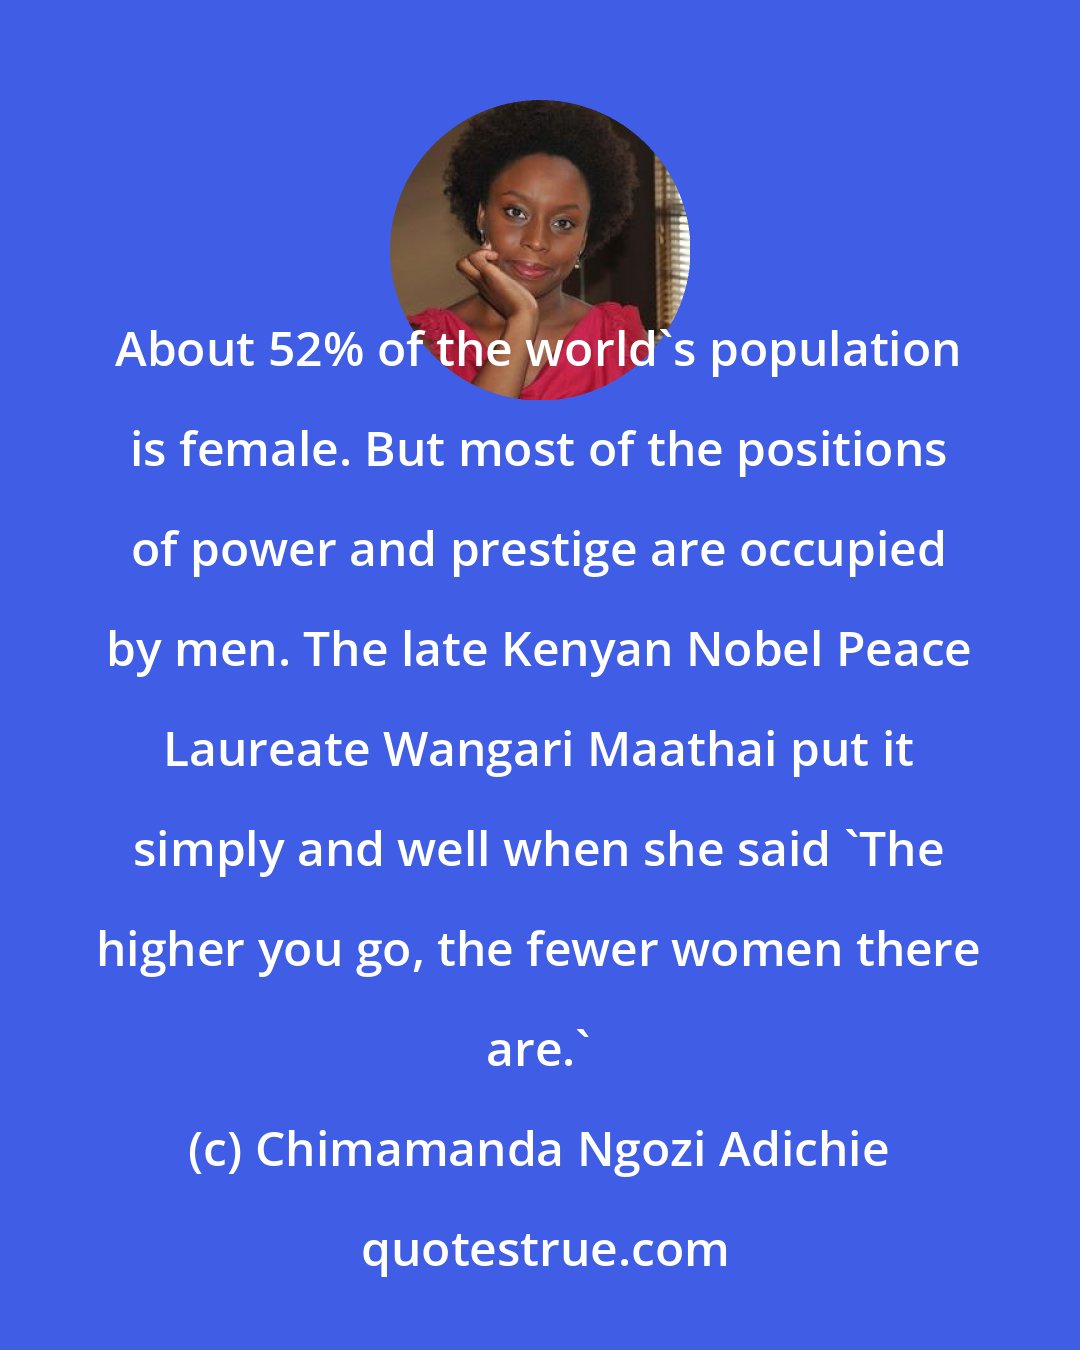 Chimamanda Ngozi Adichie: About 52% of the world's population is female. But most of the positions of power and prestige are occupied by men. The late Kenyan Nobel Peace Laureate Wangari Maathai put it simply and well when she said 'The higher you go, the fewer women there are.'